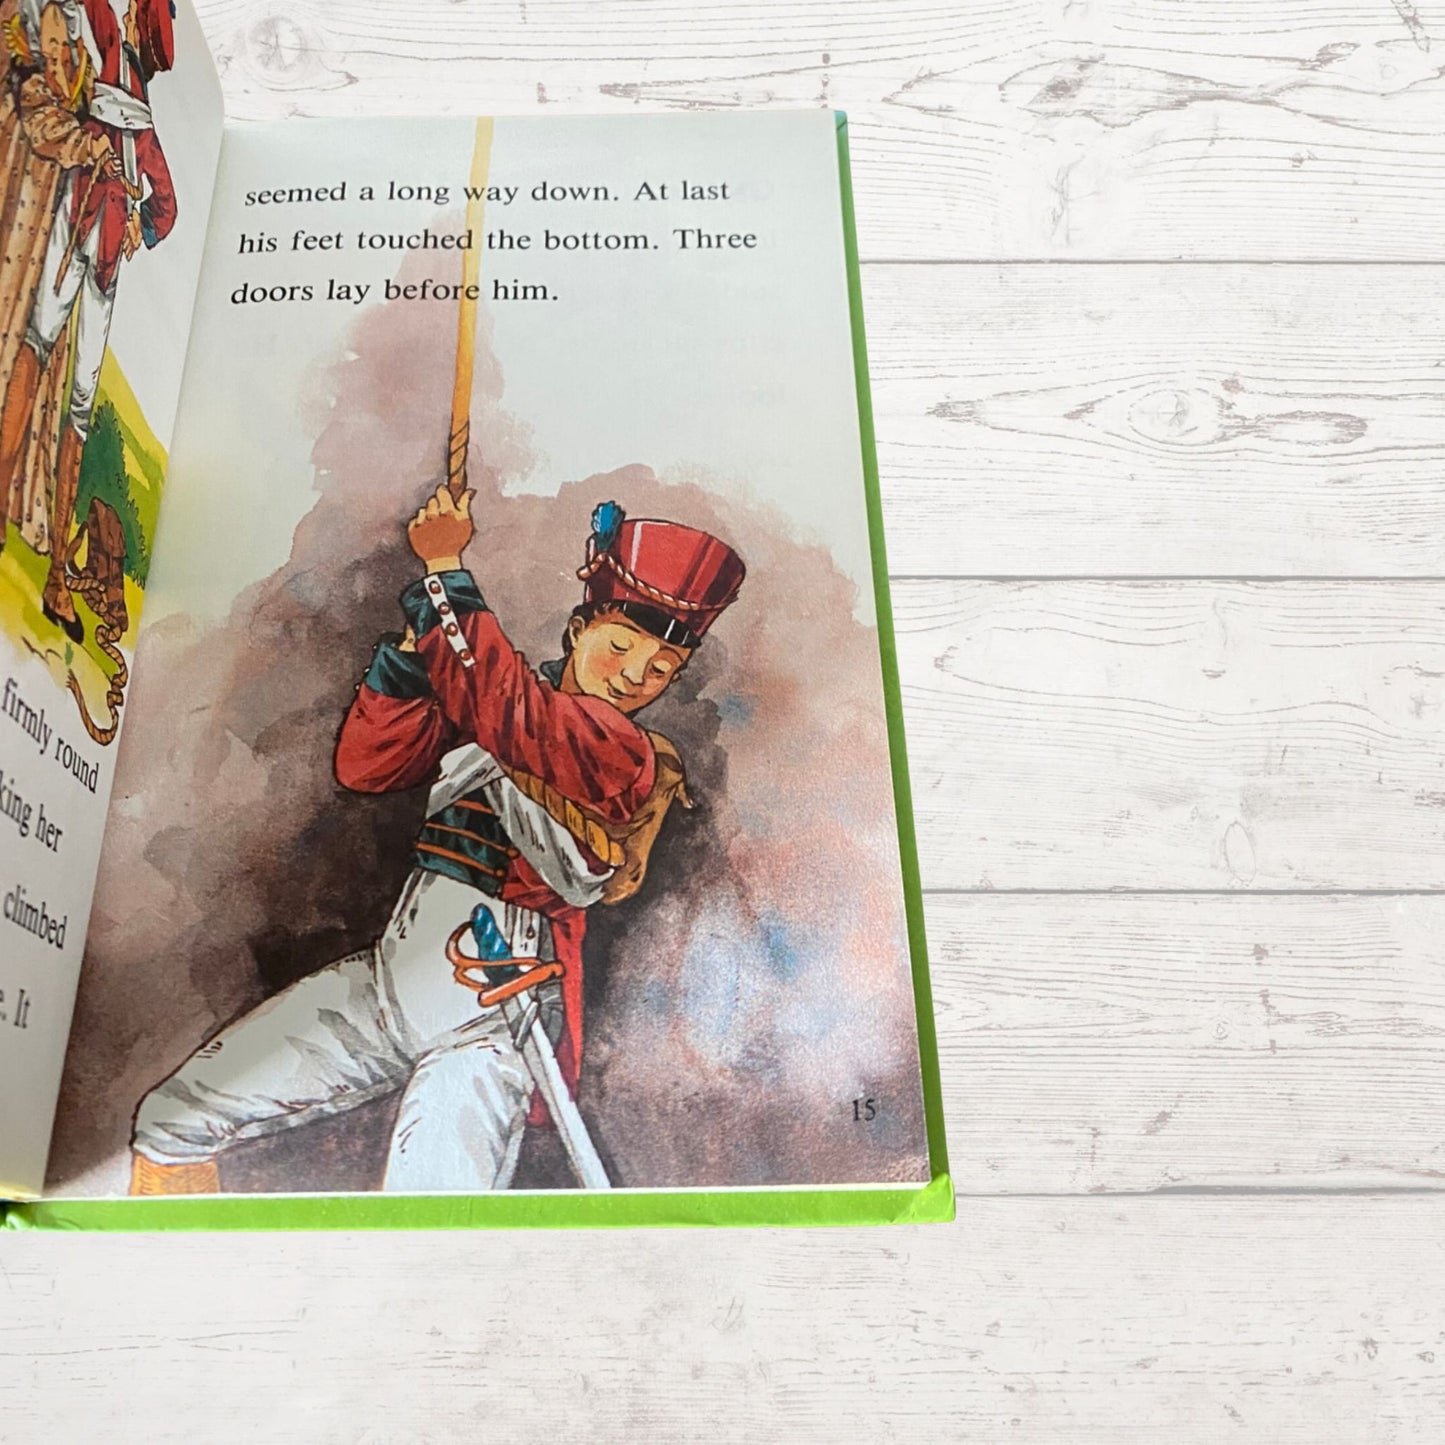 The Tinder Box: Vintage Ladybird Book from the Well Loved Tales Series 606D - Nostalgic gift idea